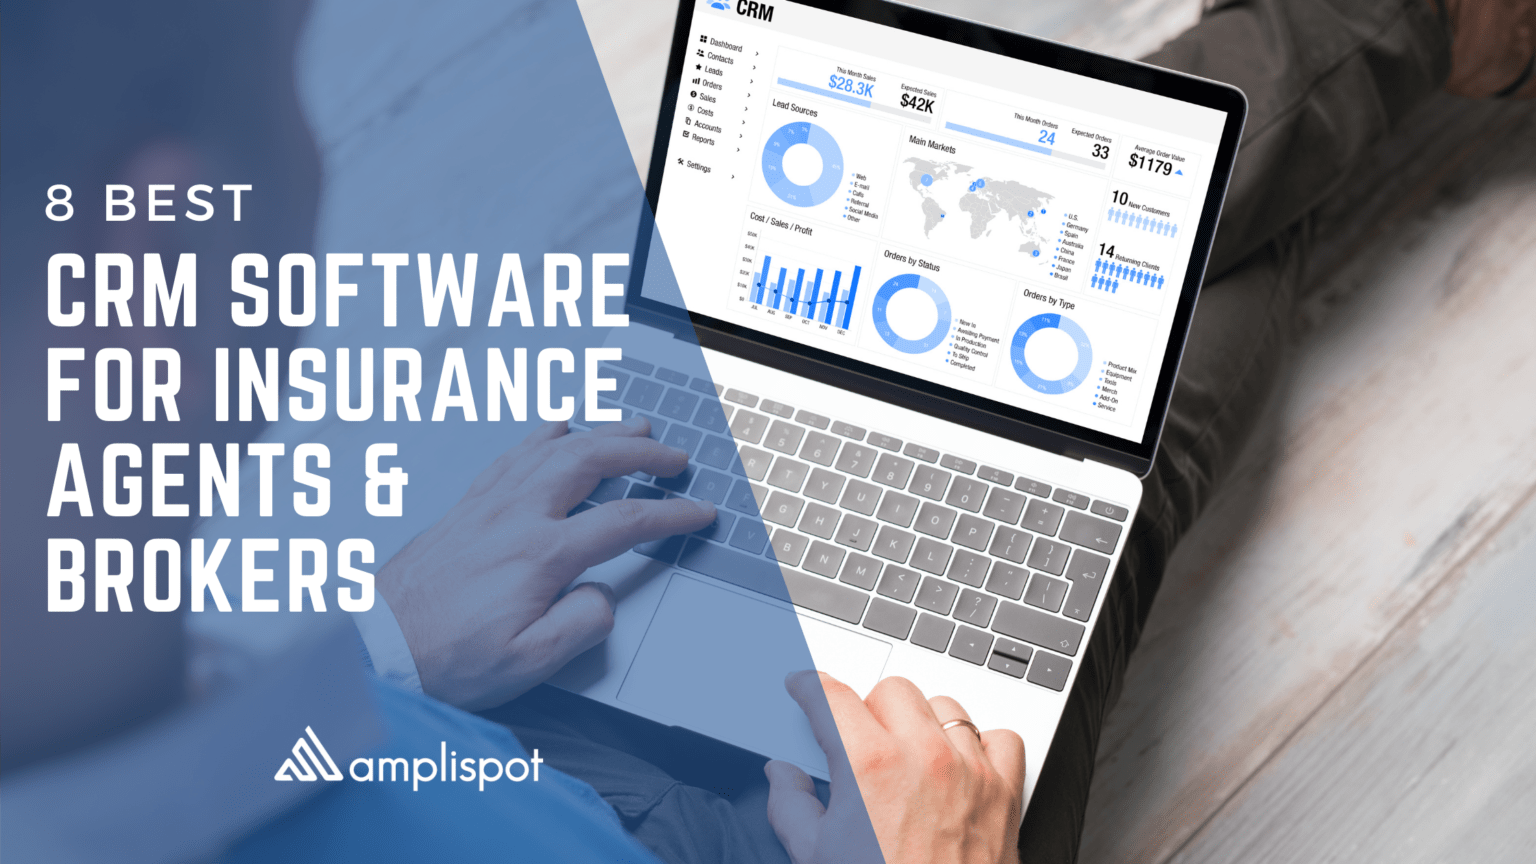 8 Best CRM Software For Insurance Agents & Brokers Amplispot